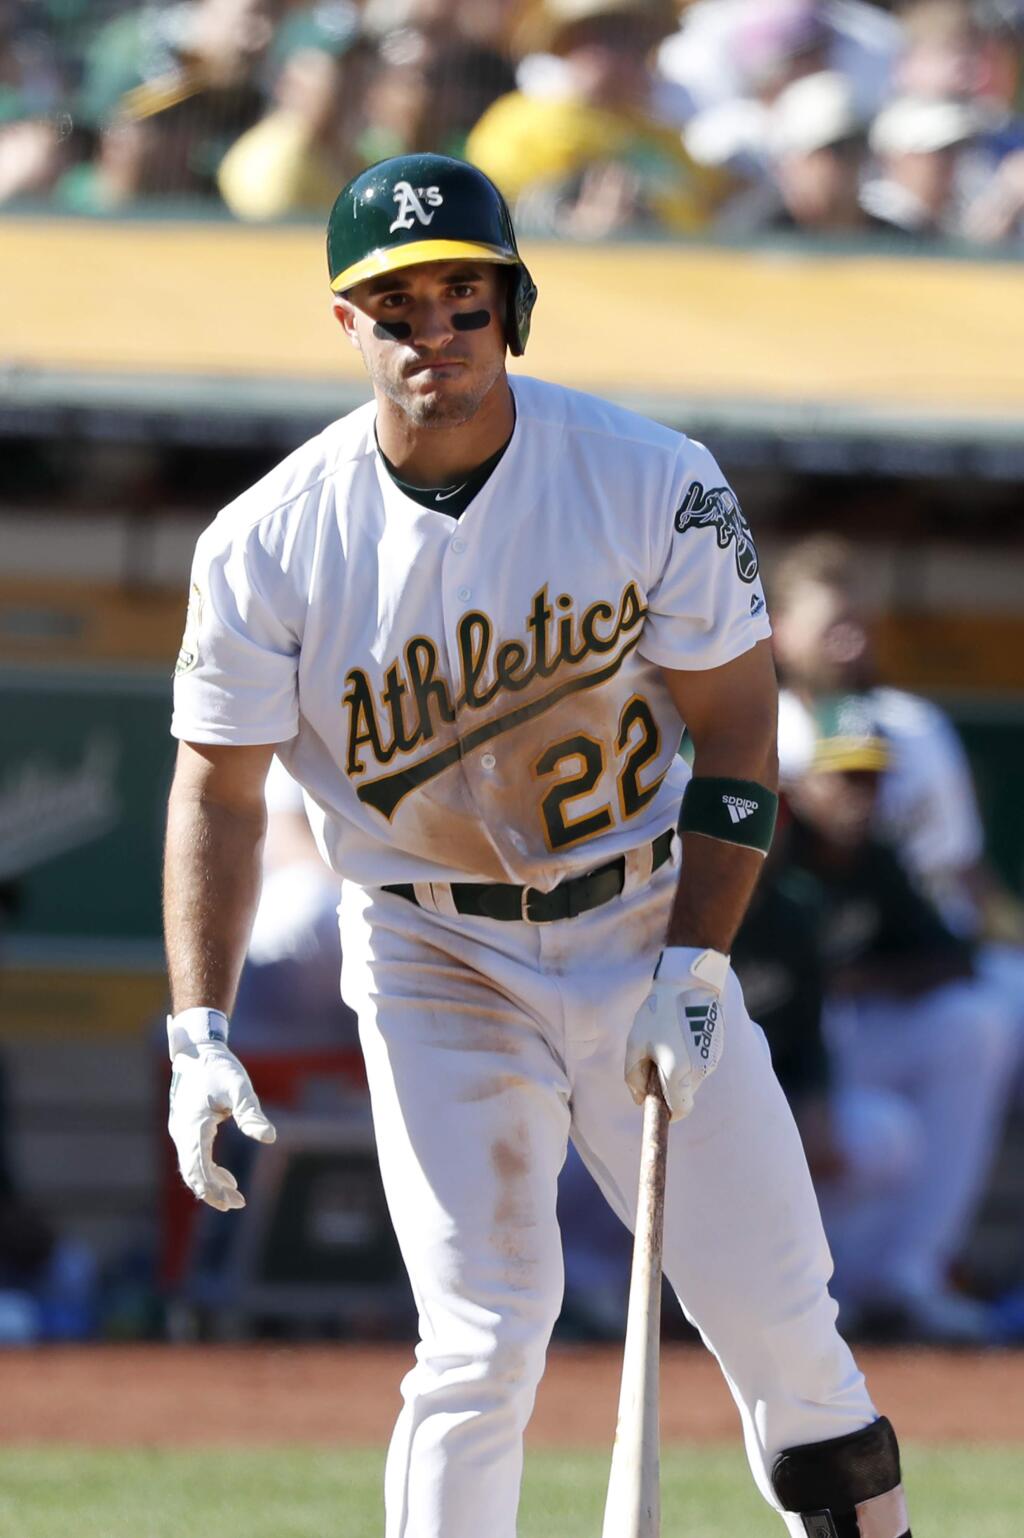 Oakland Athletics' Ramon Laureano (22) reacts after striking out against the Minnesota Twins during the eighth inning of a baseball game in Oakland, Calif., Sunday, Sept. 23, 2018. (AP Photo/Tony Avelar)